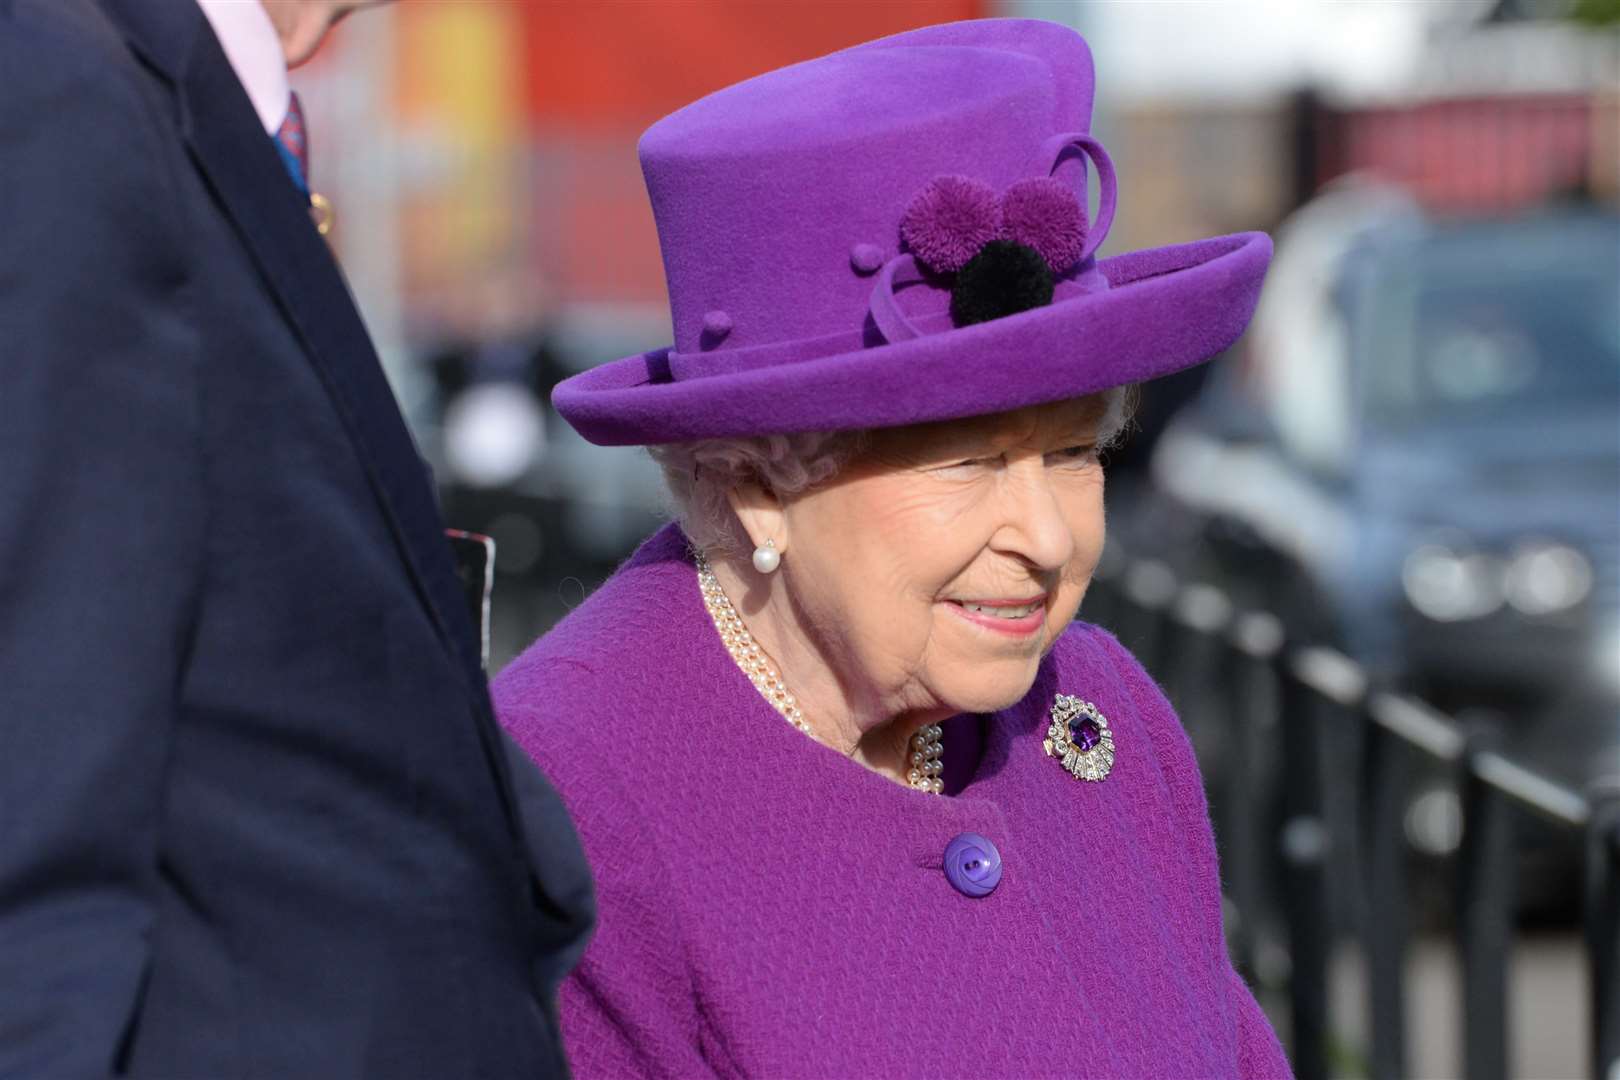 The Queen is preparing to mark 70 years on the throne